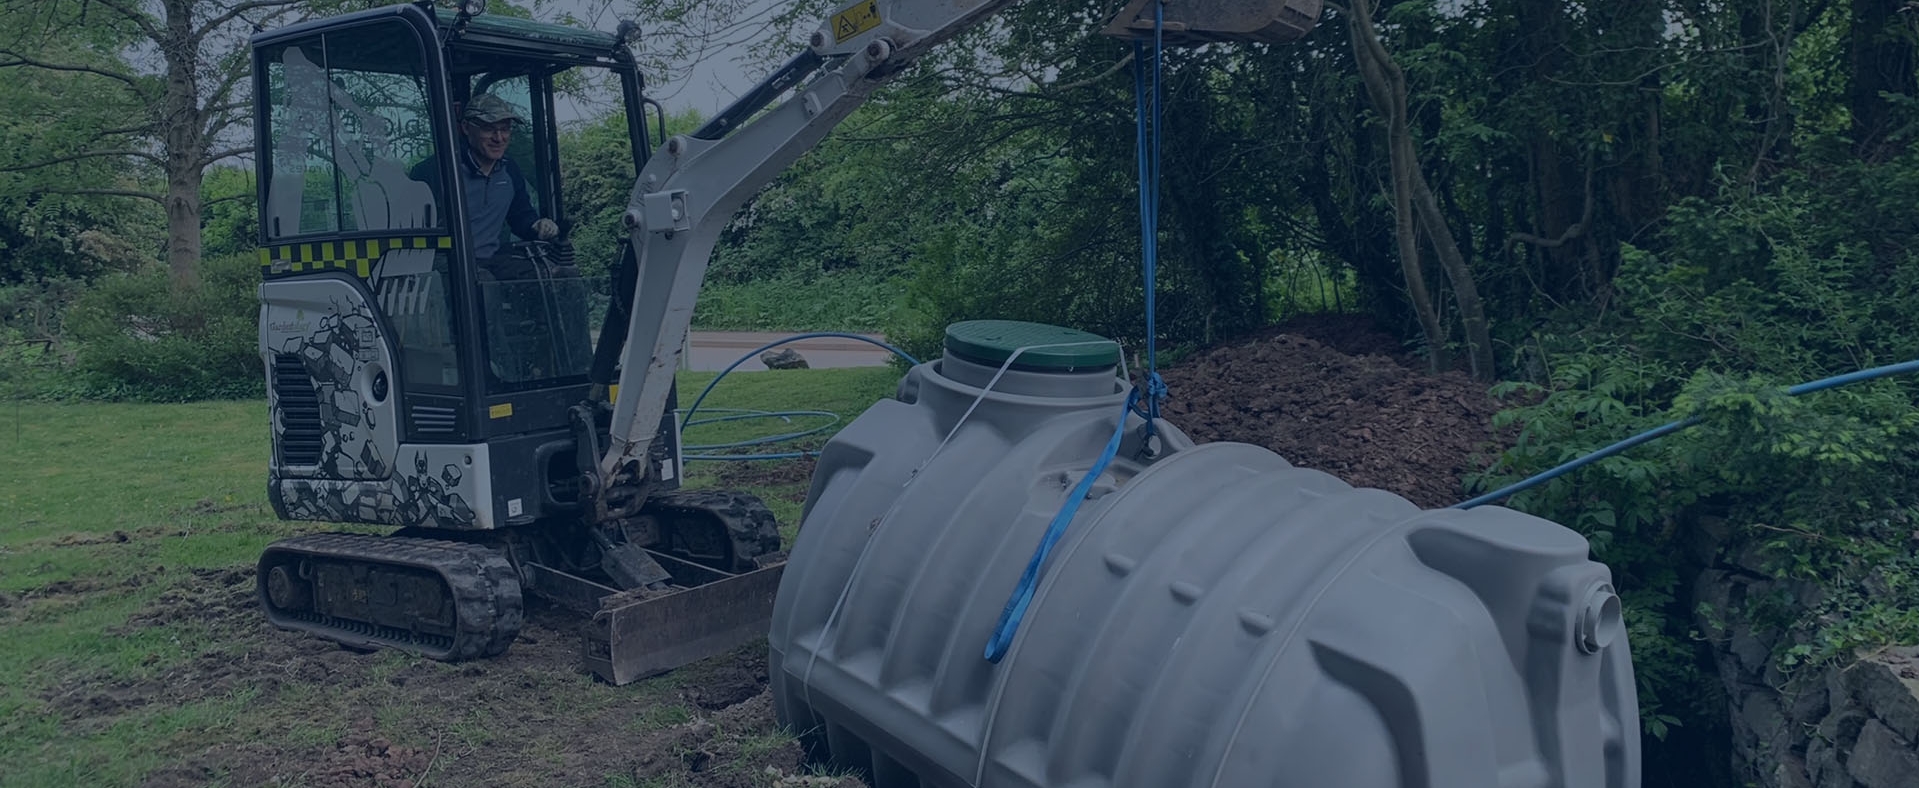 Excavator installing the Rewatec septic tank on a forested property in the United Kingdom.